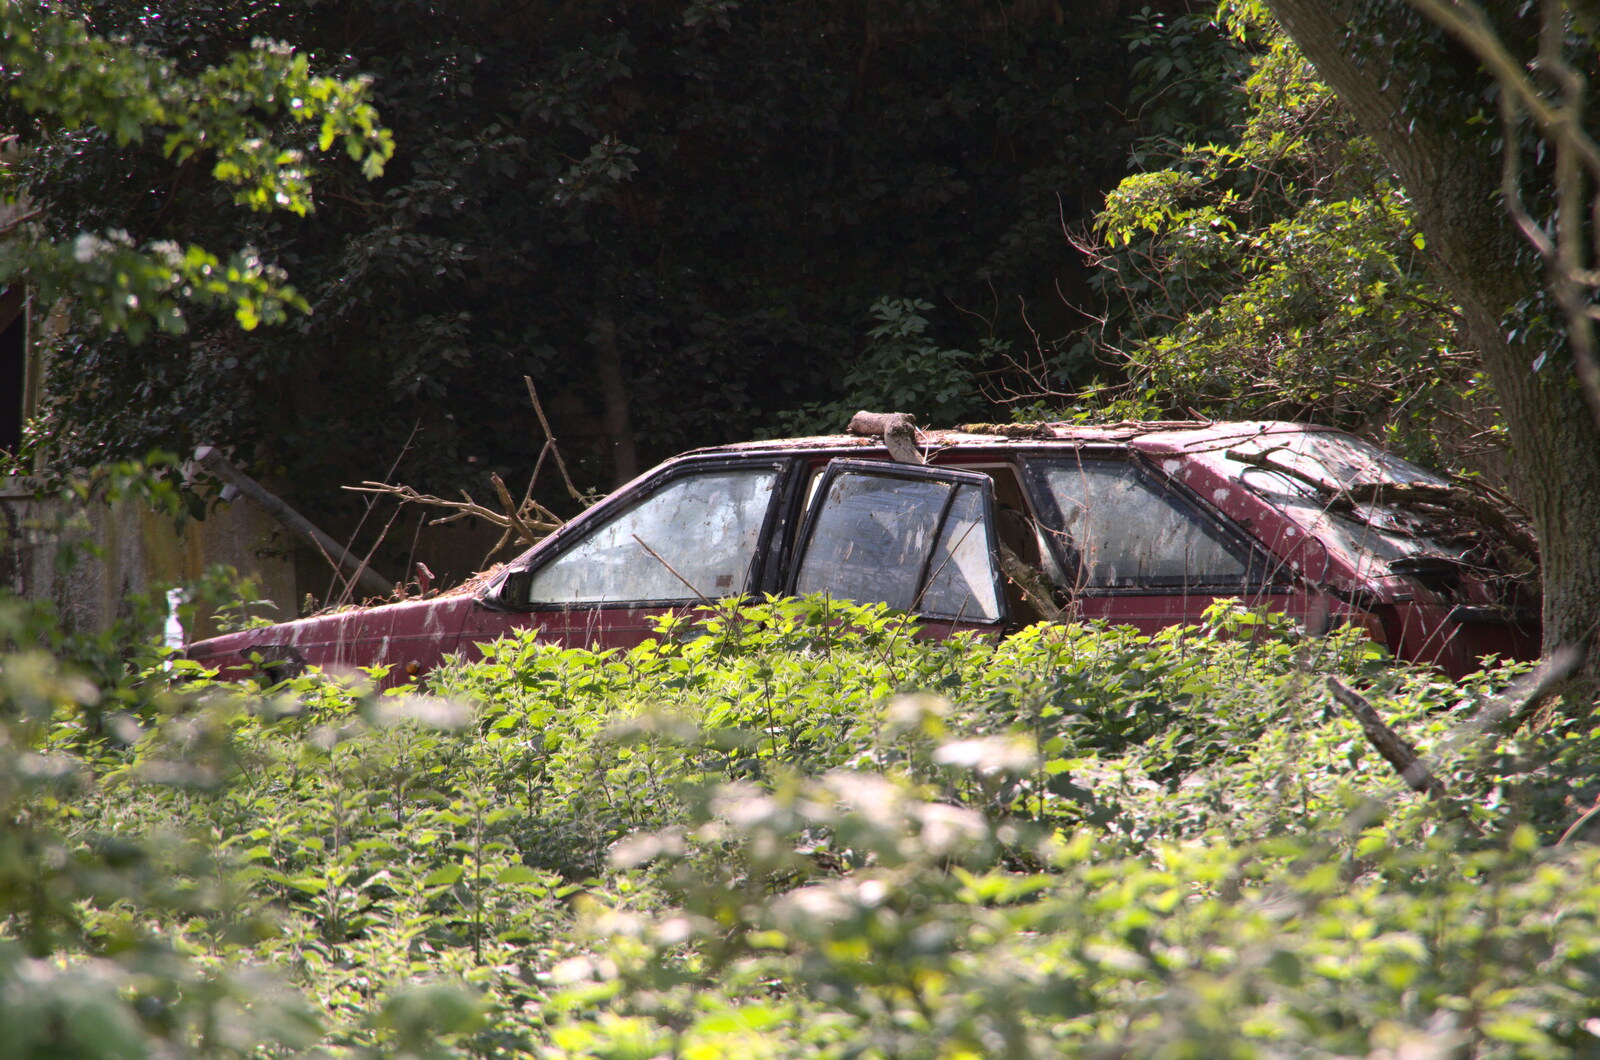 There's a derelict car in the woods from Lost Cat and a Walk on Nick's Lane, Brome, Suffolk - 26th April 2020